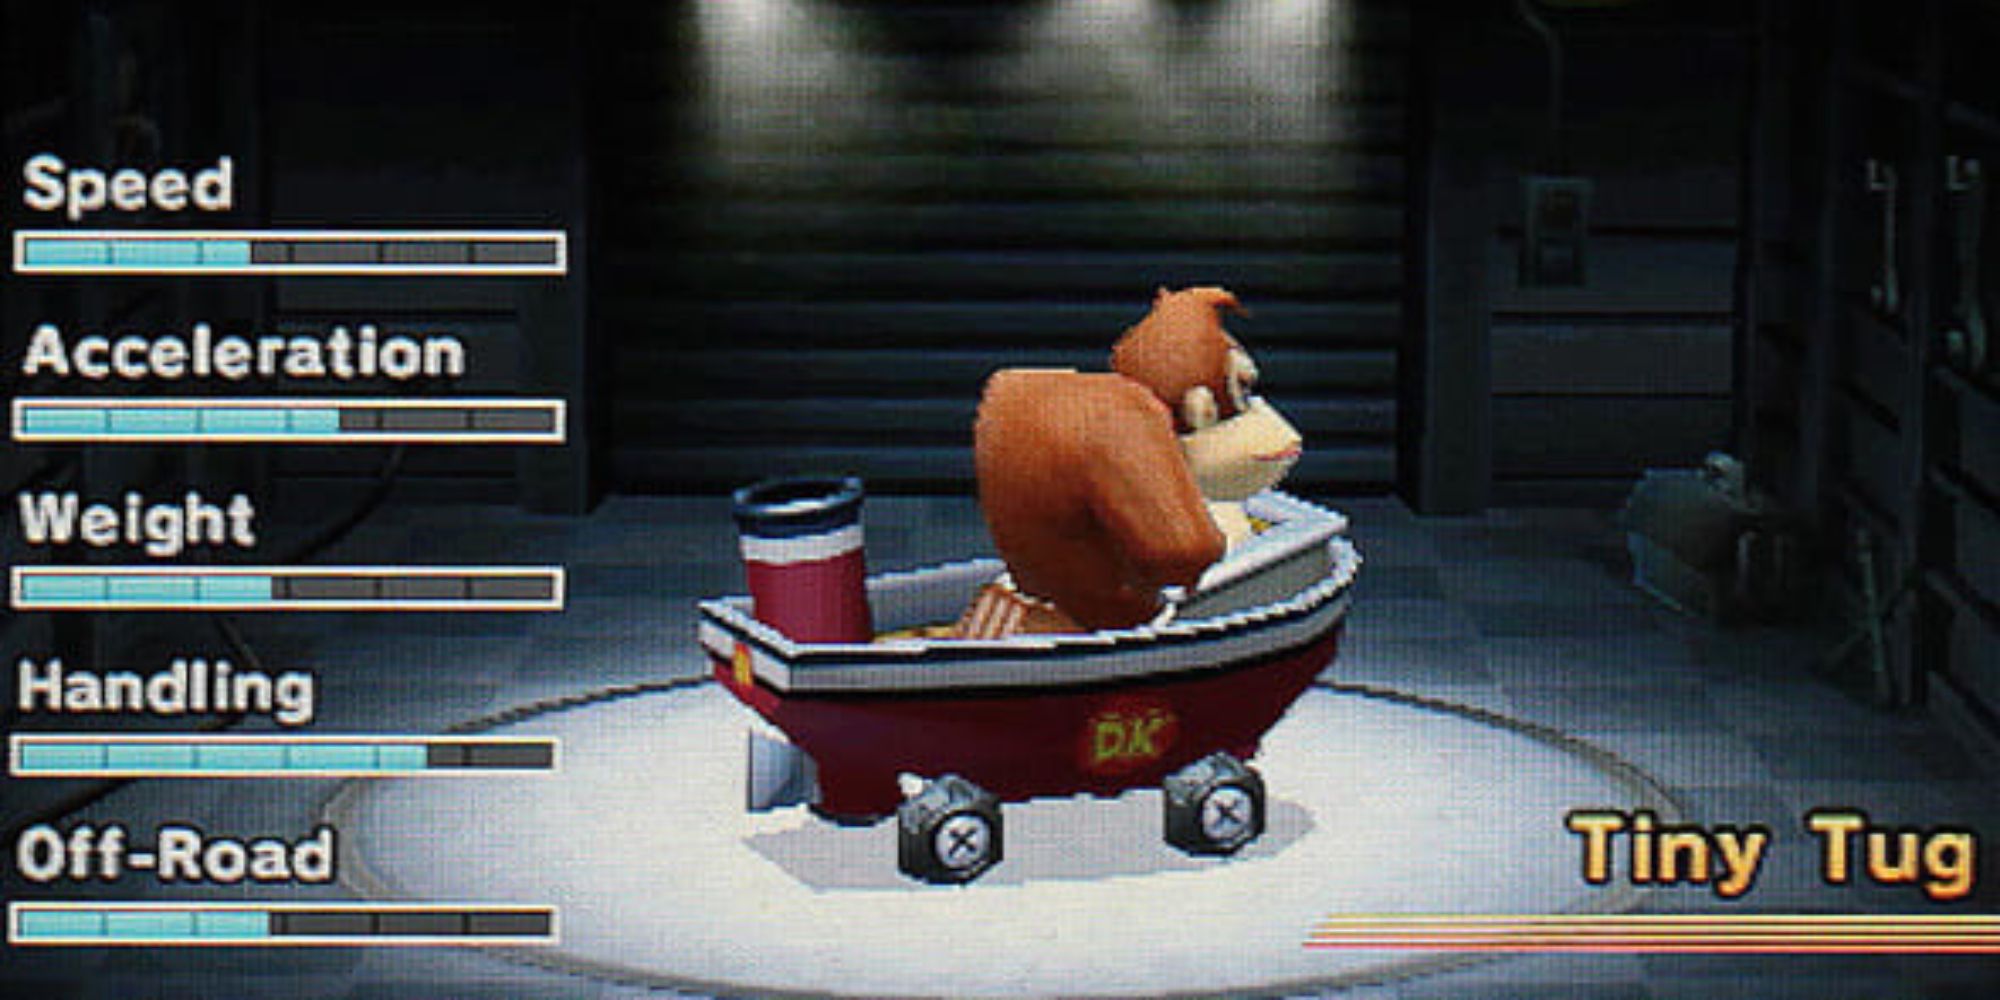 Mario Kart Vehicle Designs Donkey Kong in the Tiny Tug kart against a grey background with statistics on his left